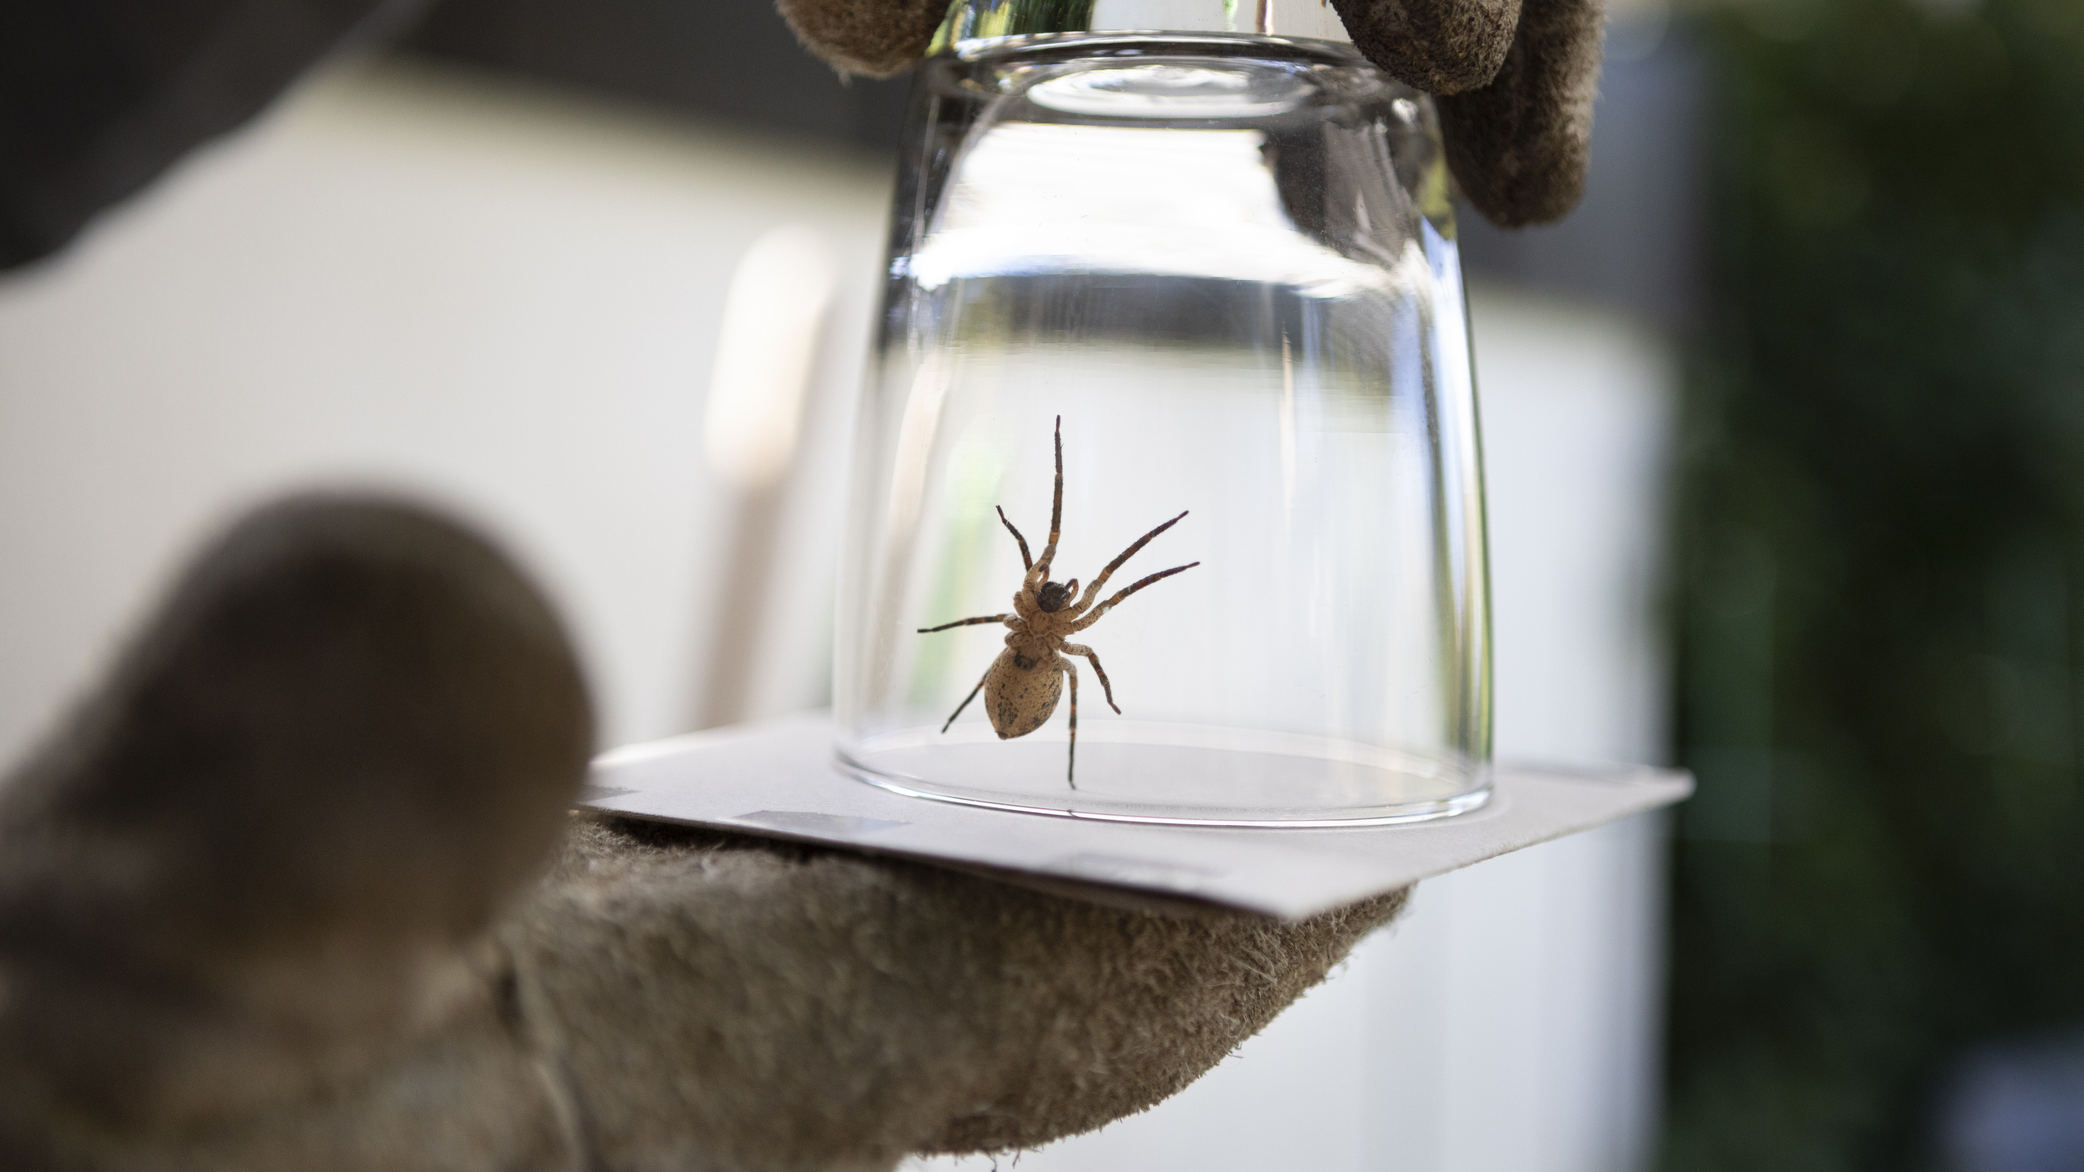 A person wearing gloves catches a spider between a glass and a piece of cardboard.